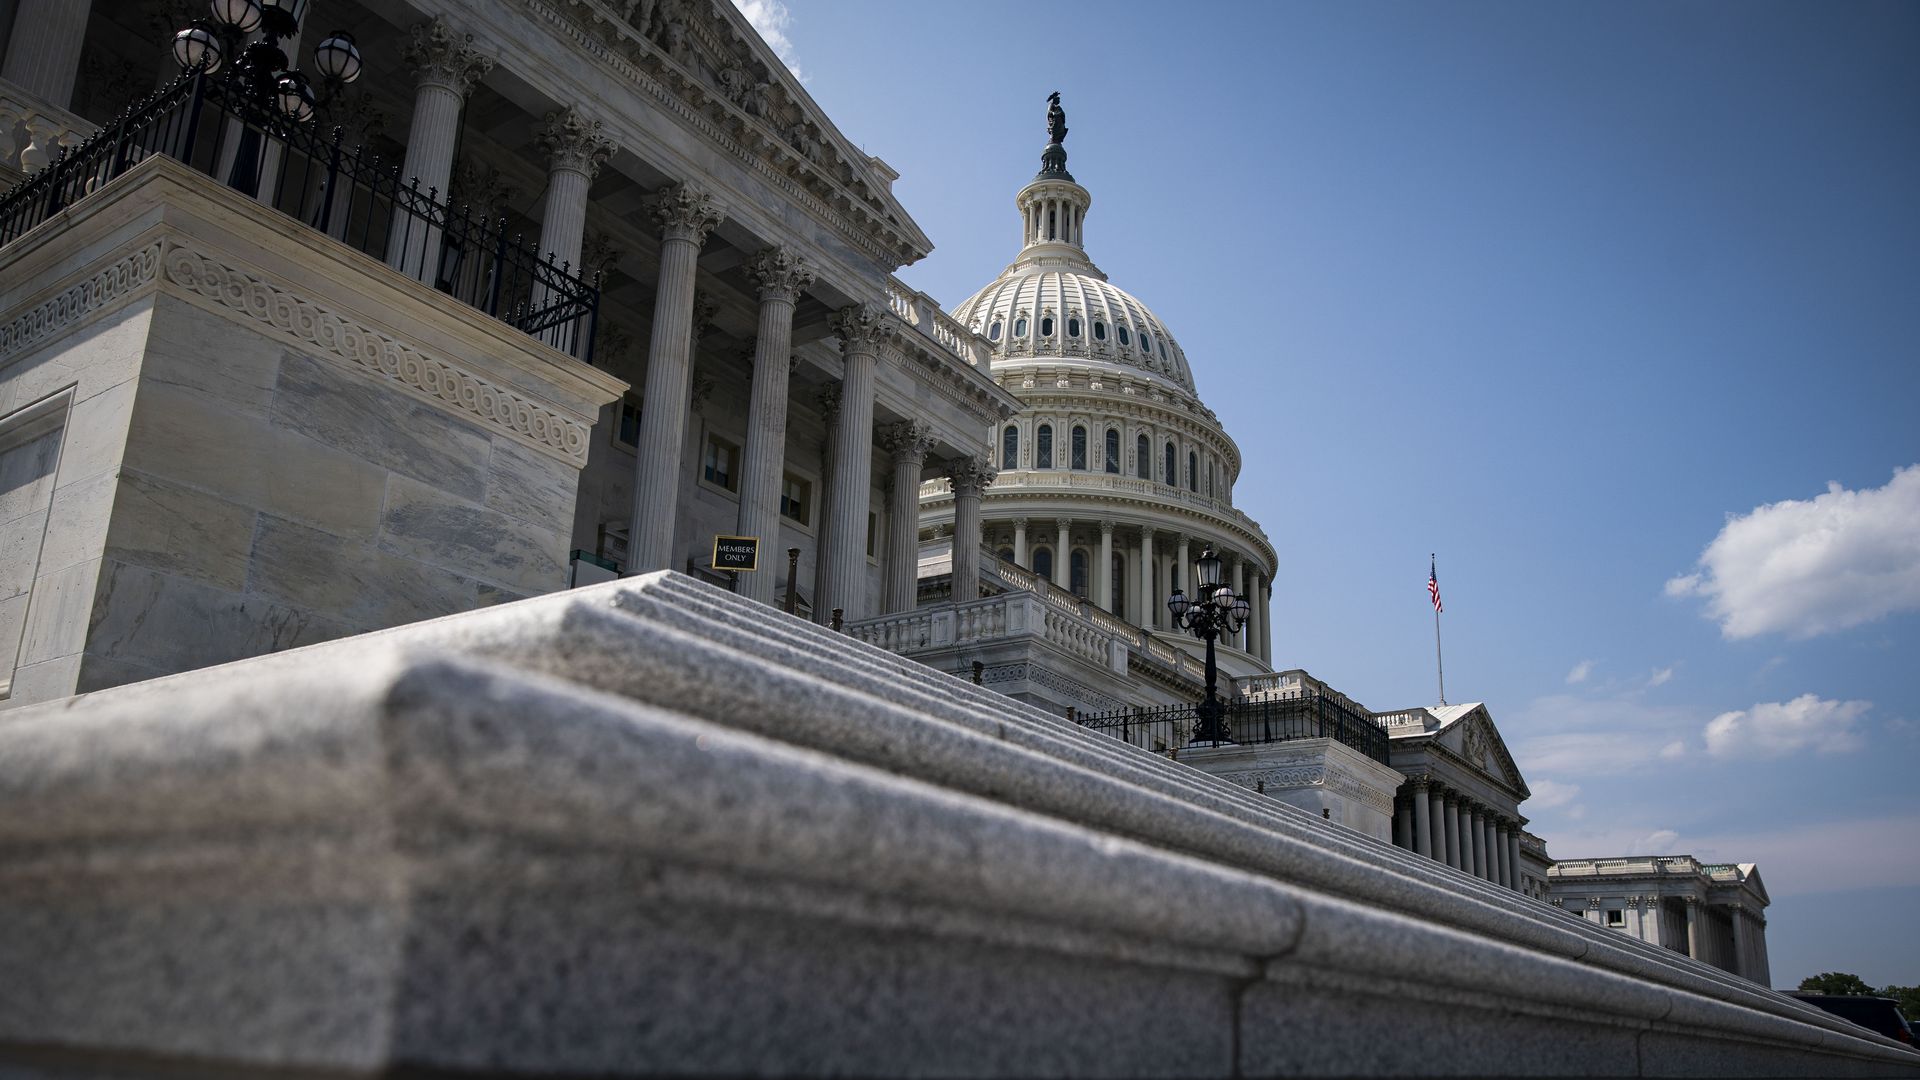 The steps to the House of Representatives is seen against a backdrop of the U.S. Capitol.